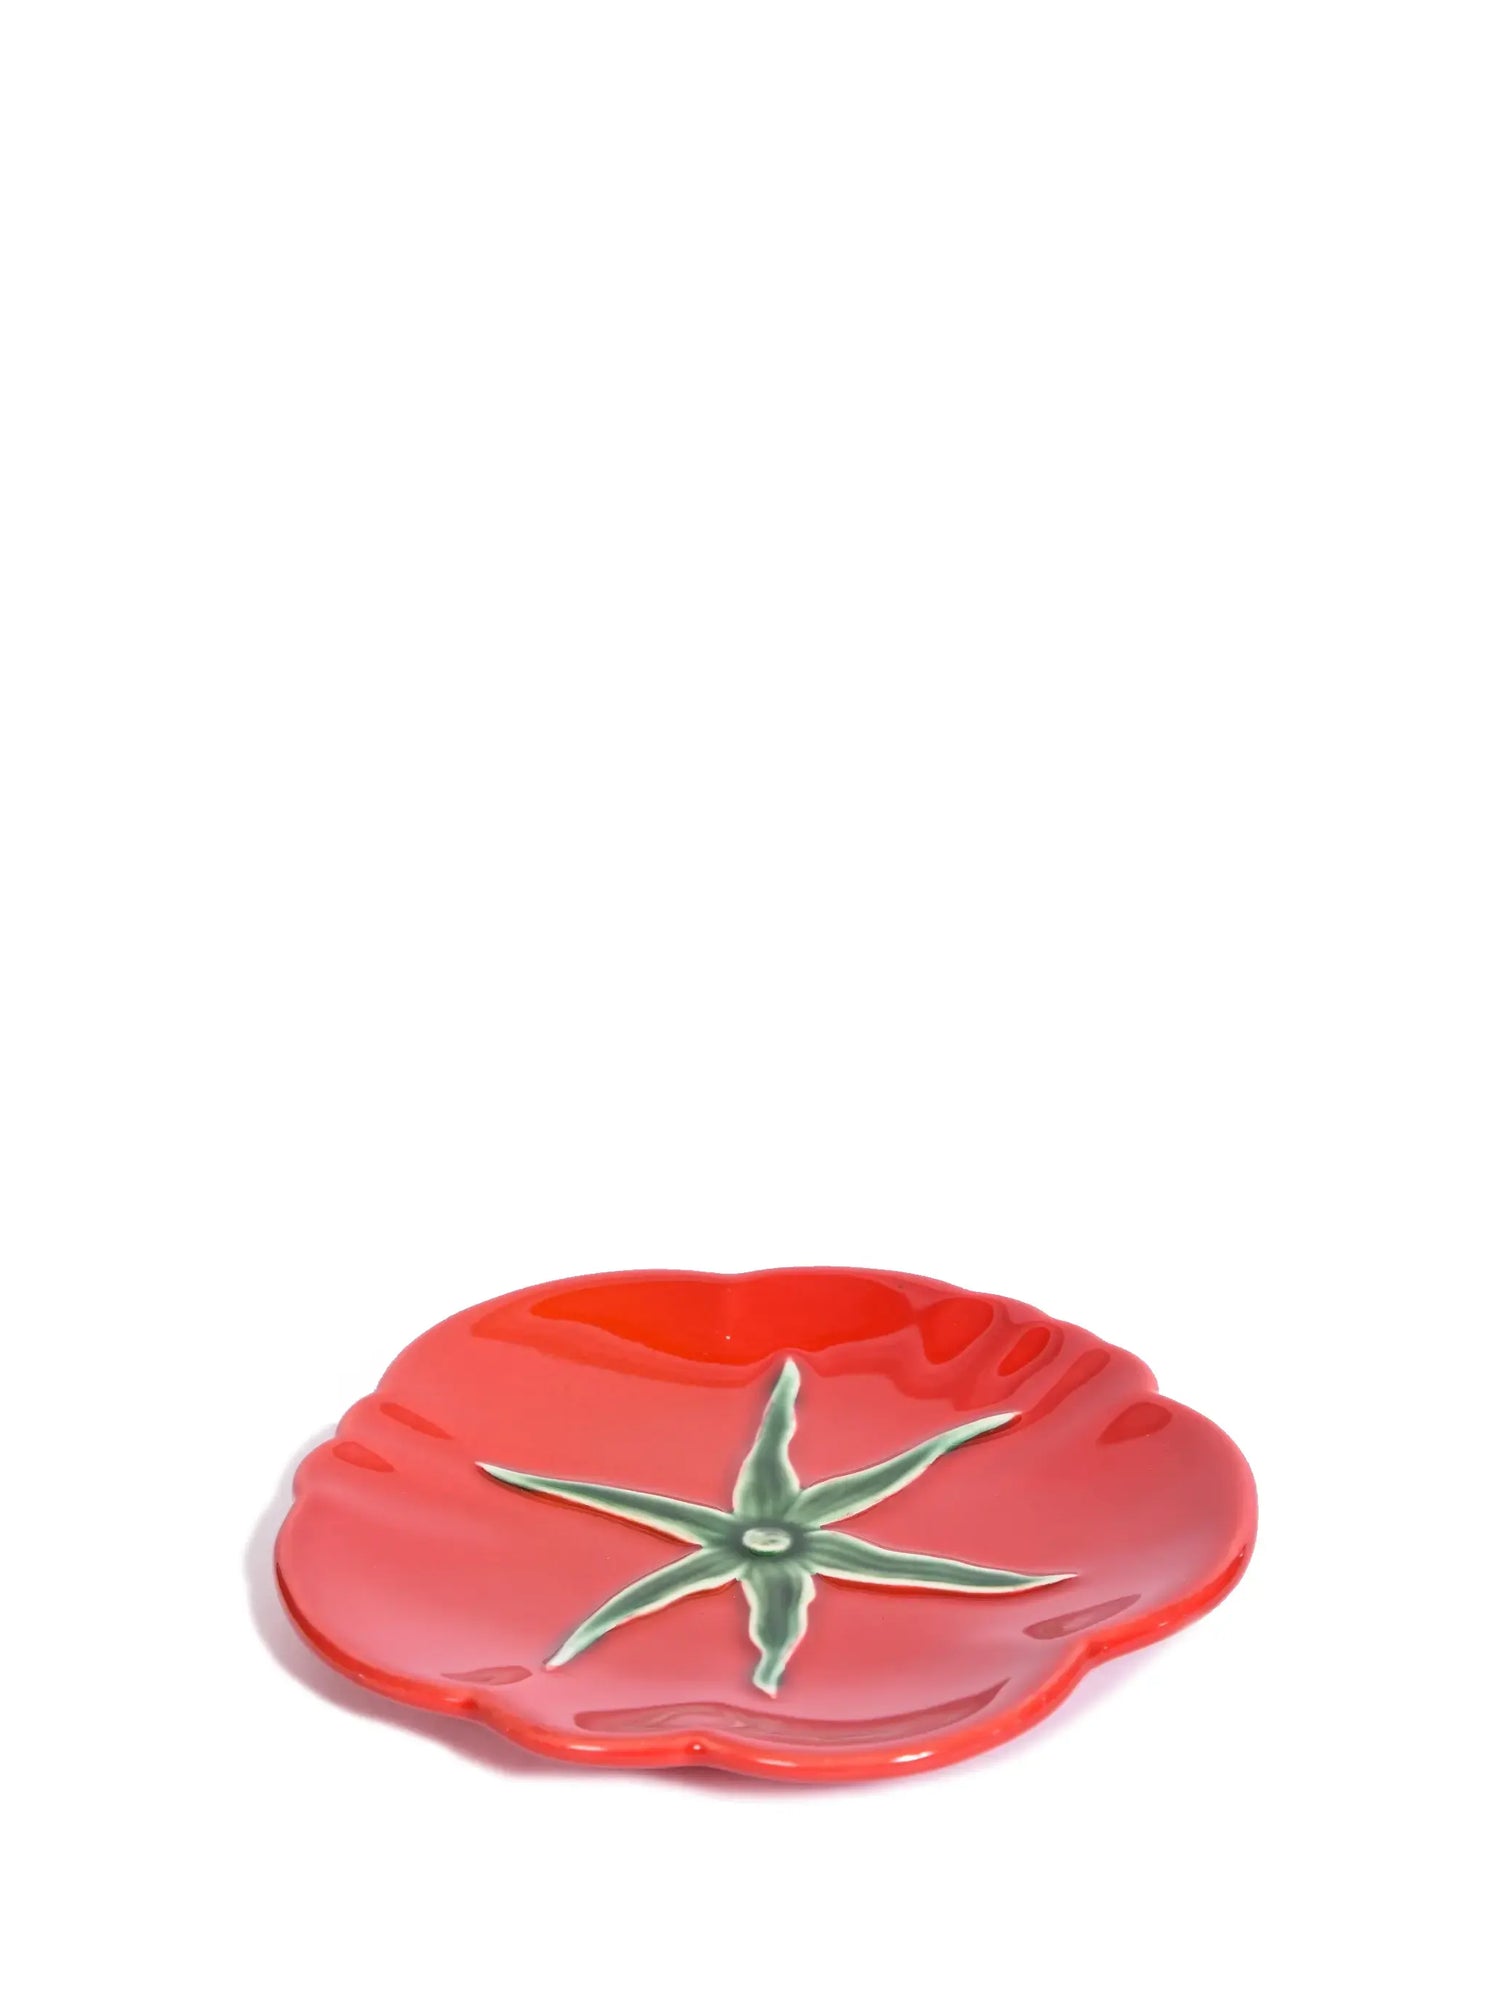 Tomato side plate (15 cm), red